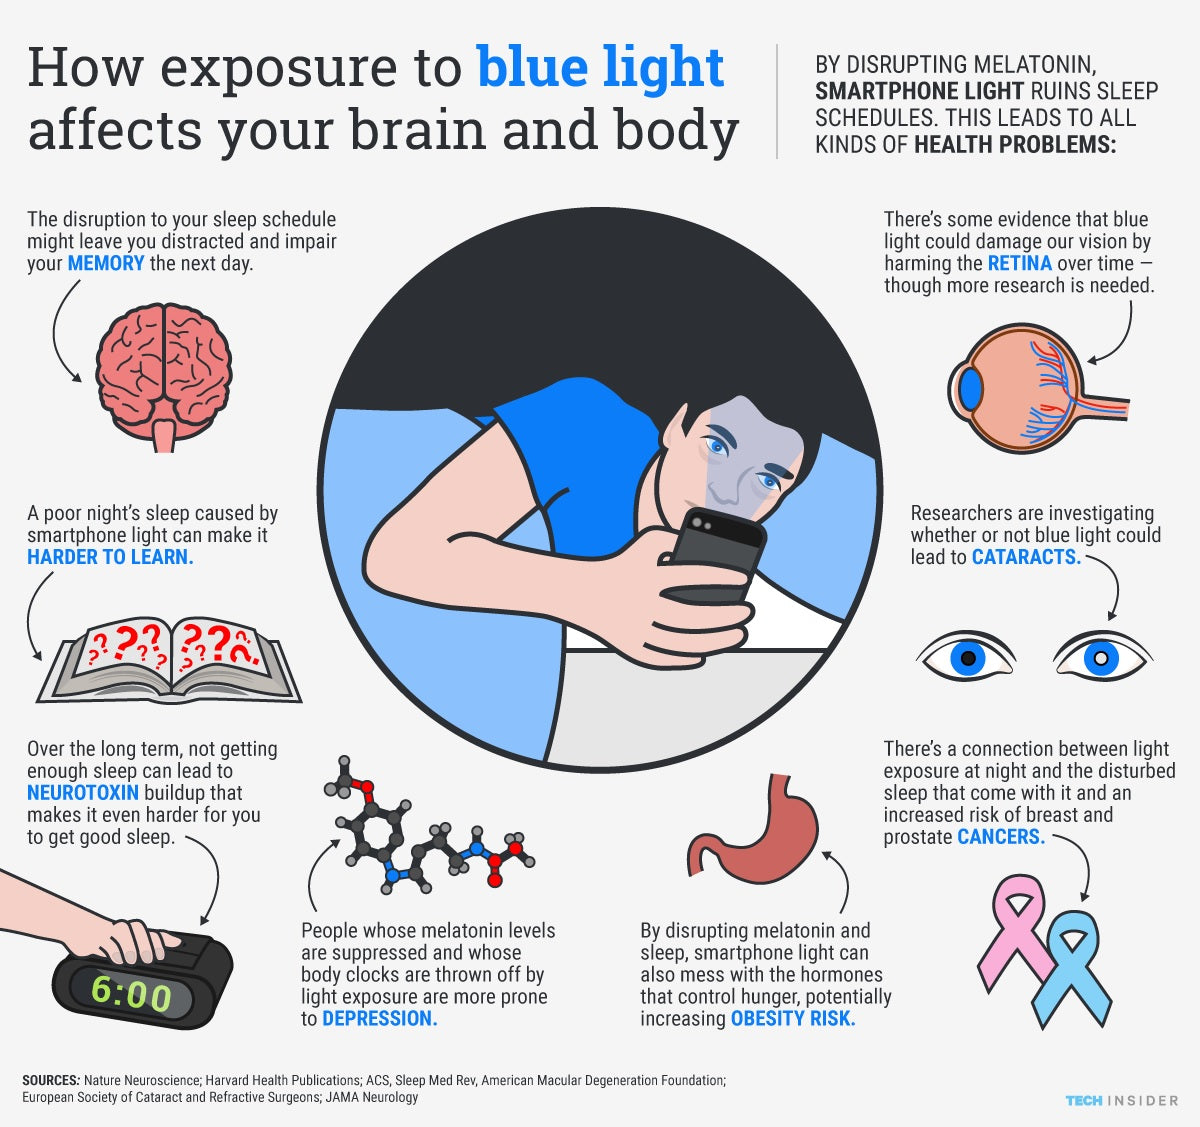 How exposure to blue light affects your brain and sleep